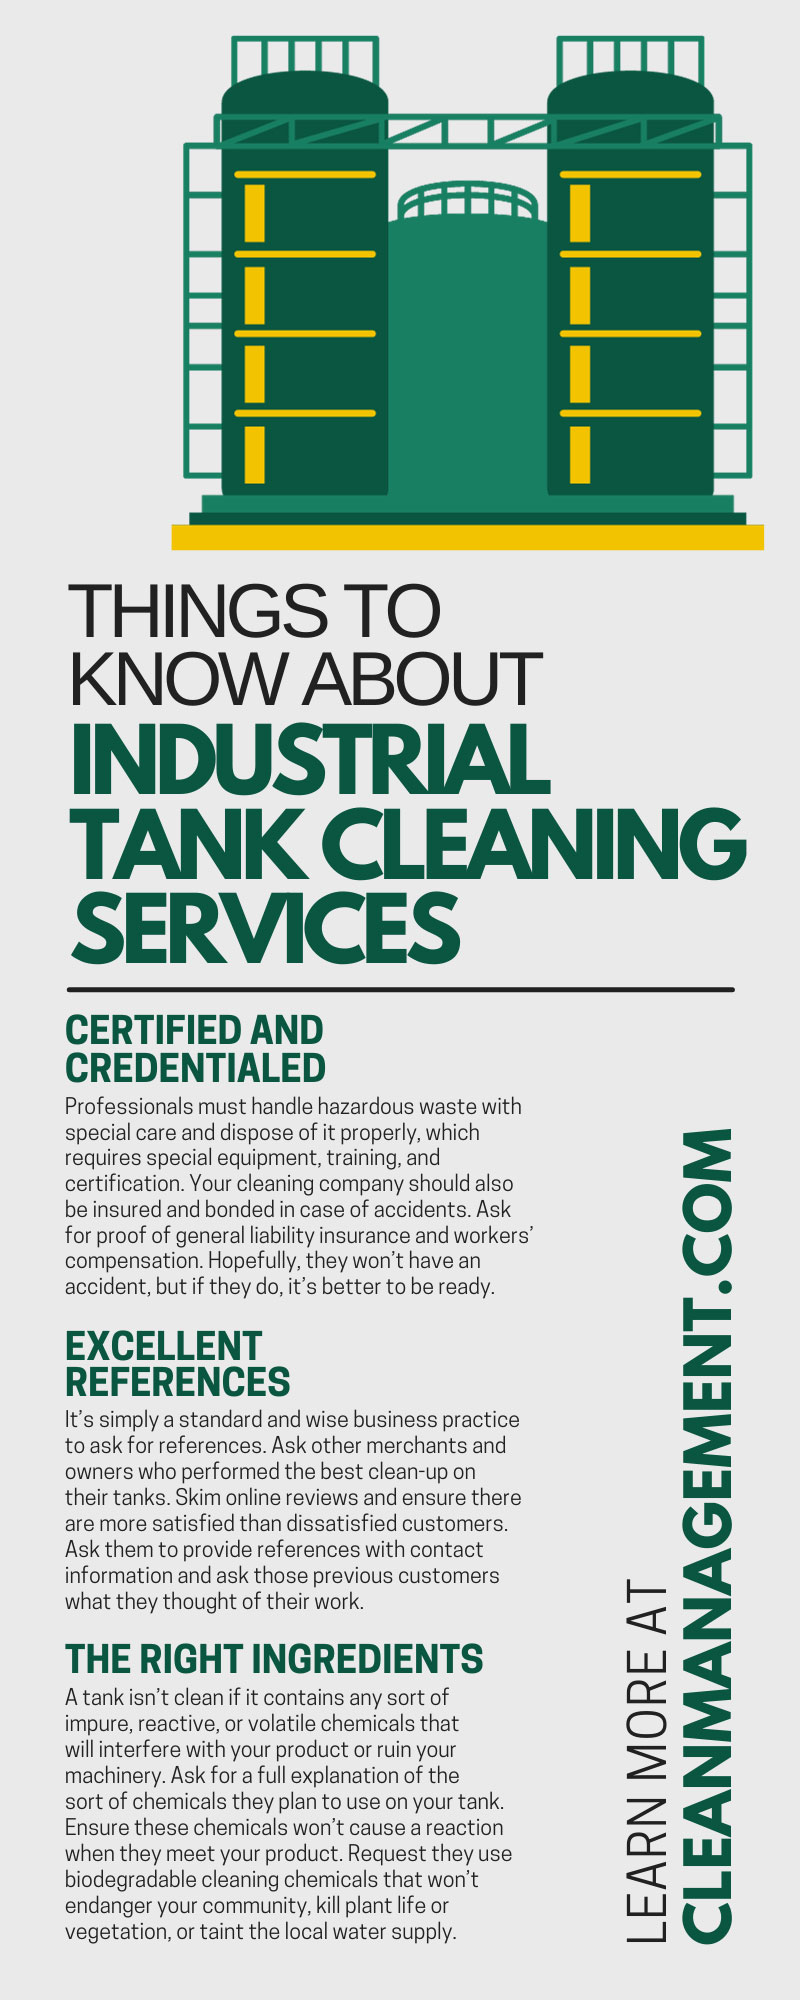 7 Things To Know About Industrial Tank Cleaning Services